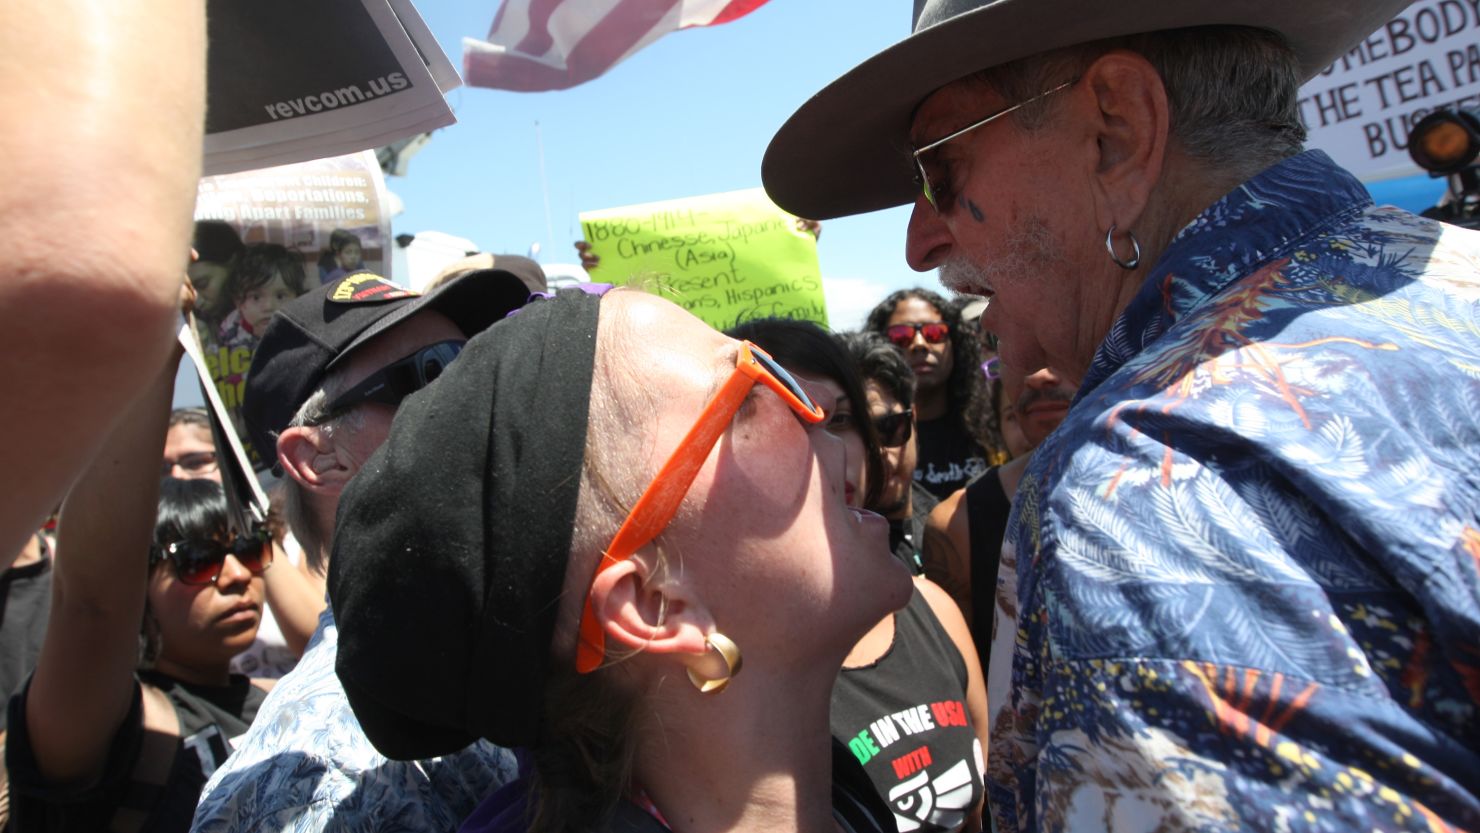 A protester against buses carrying immigrants, right, faces off with a pro-immigration protester in Murrieta, Calfornia, on July 4. 